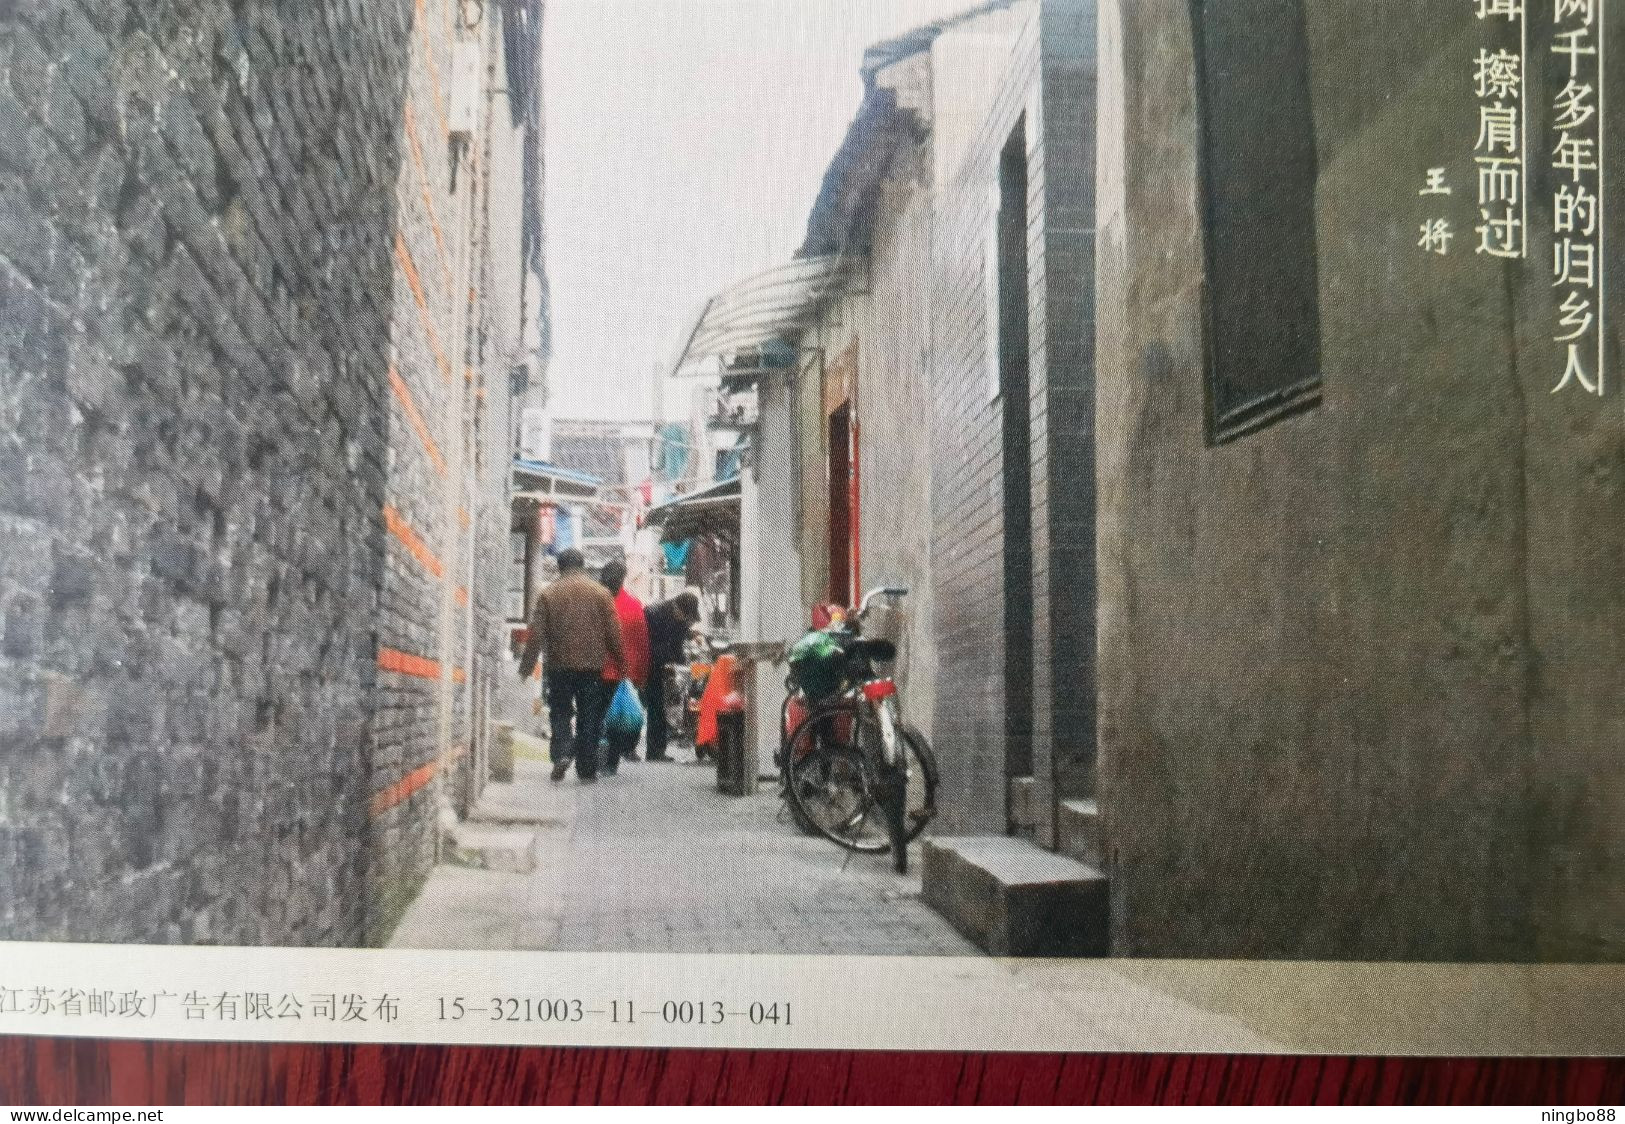 Street Bicycle Parking,bike,China 2015 Grand Canal Dongguan Ancient Ferry UNESCO World Heritage Pre-stamped Card - Vélo